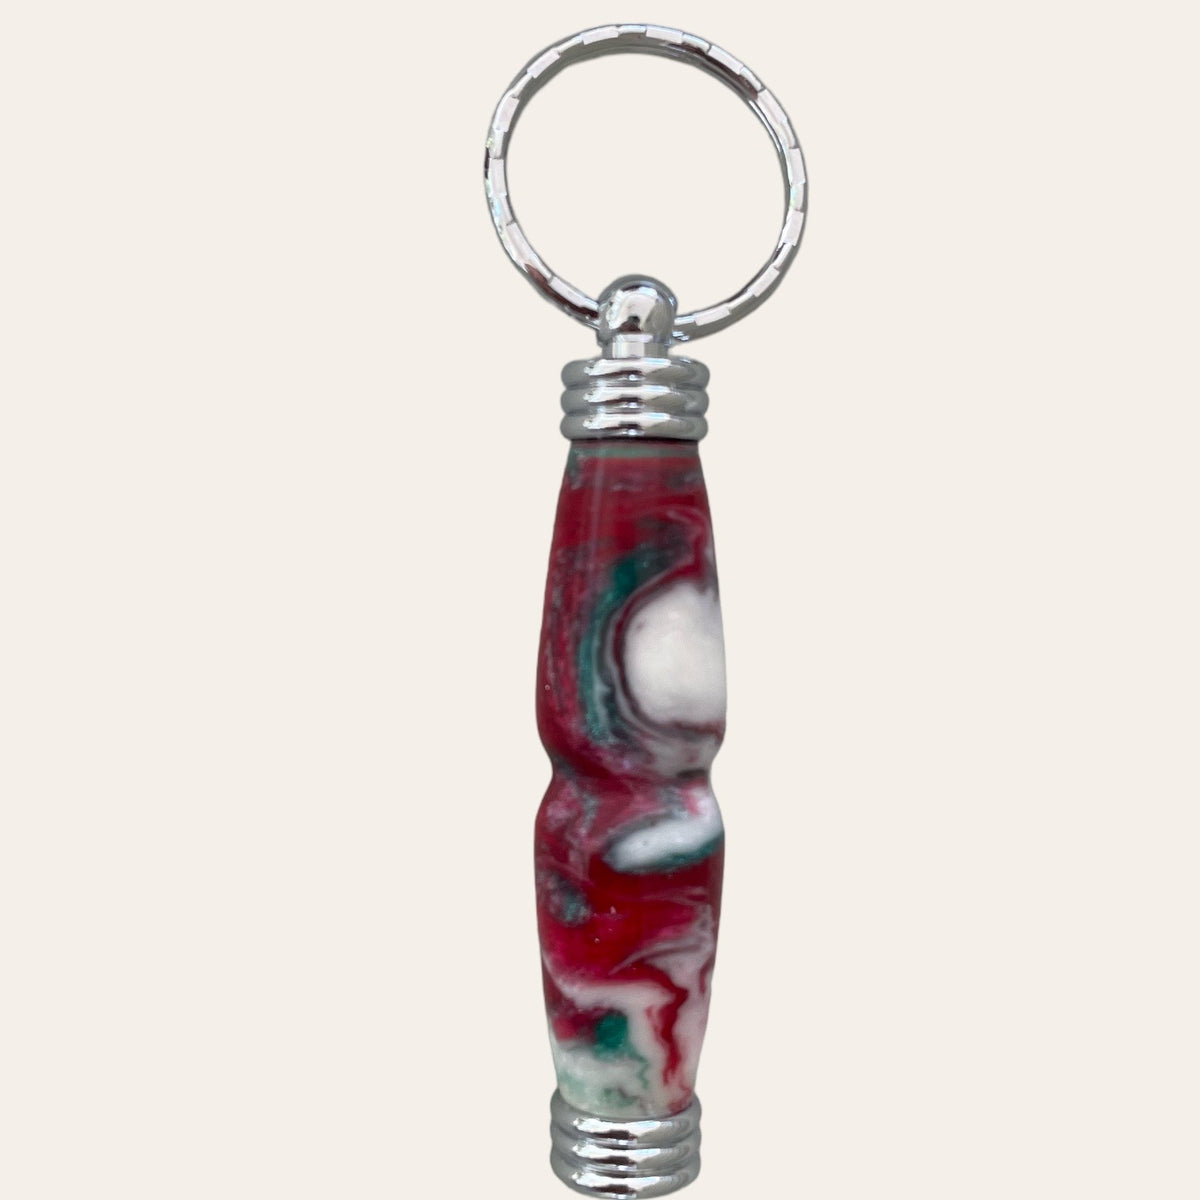 secret compartment keychain made from resin and called nougat. coloring is red , white, and green. Paul's Hand Turned Creations